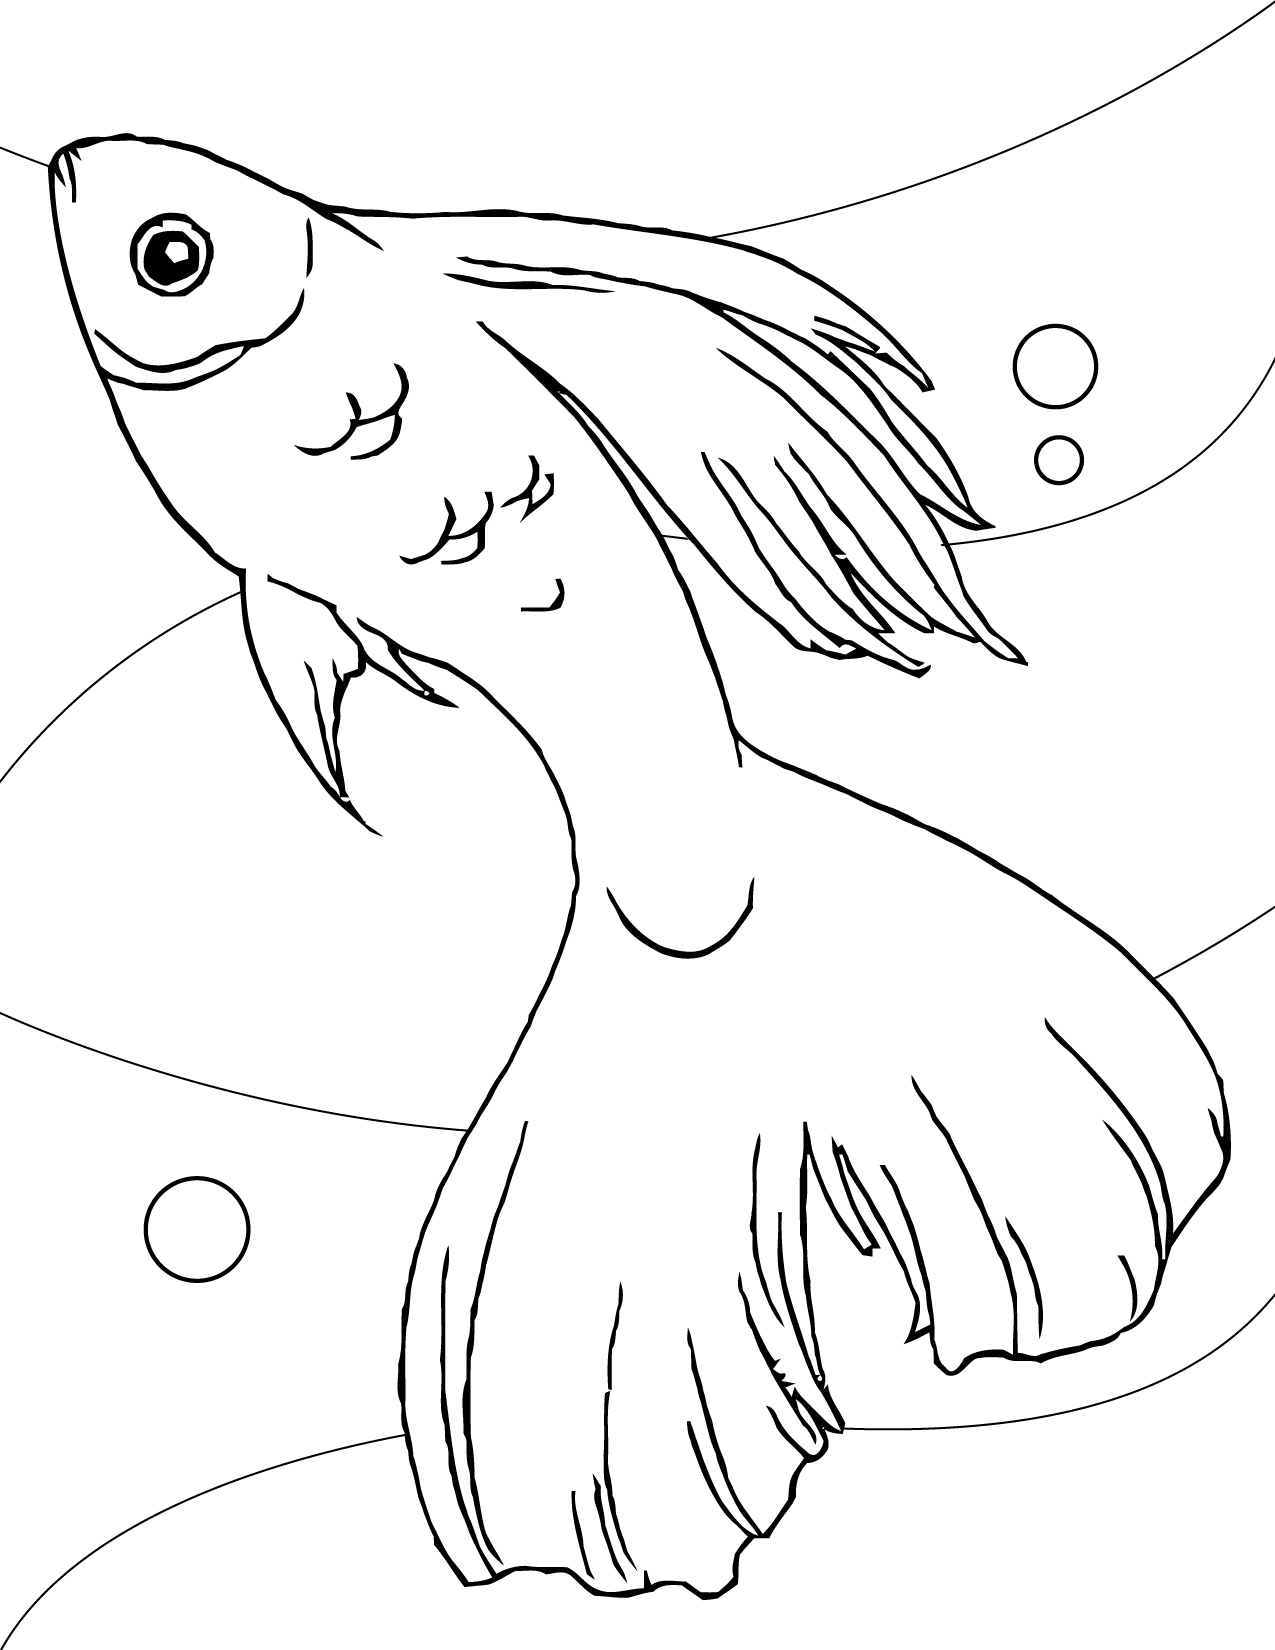 Tropical Fish Coloring Pages For Adults Coloring Pages